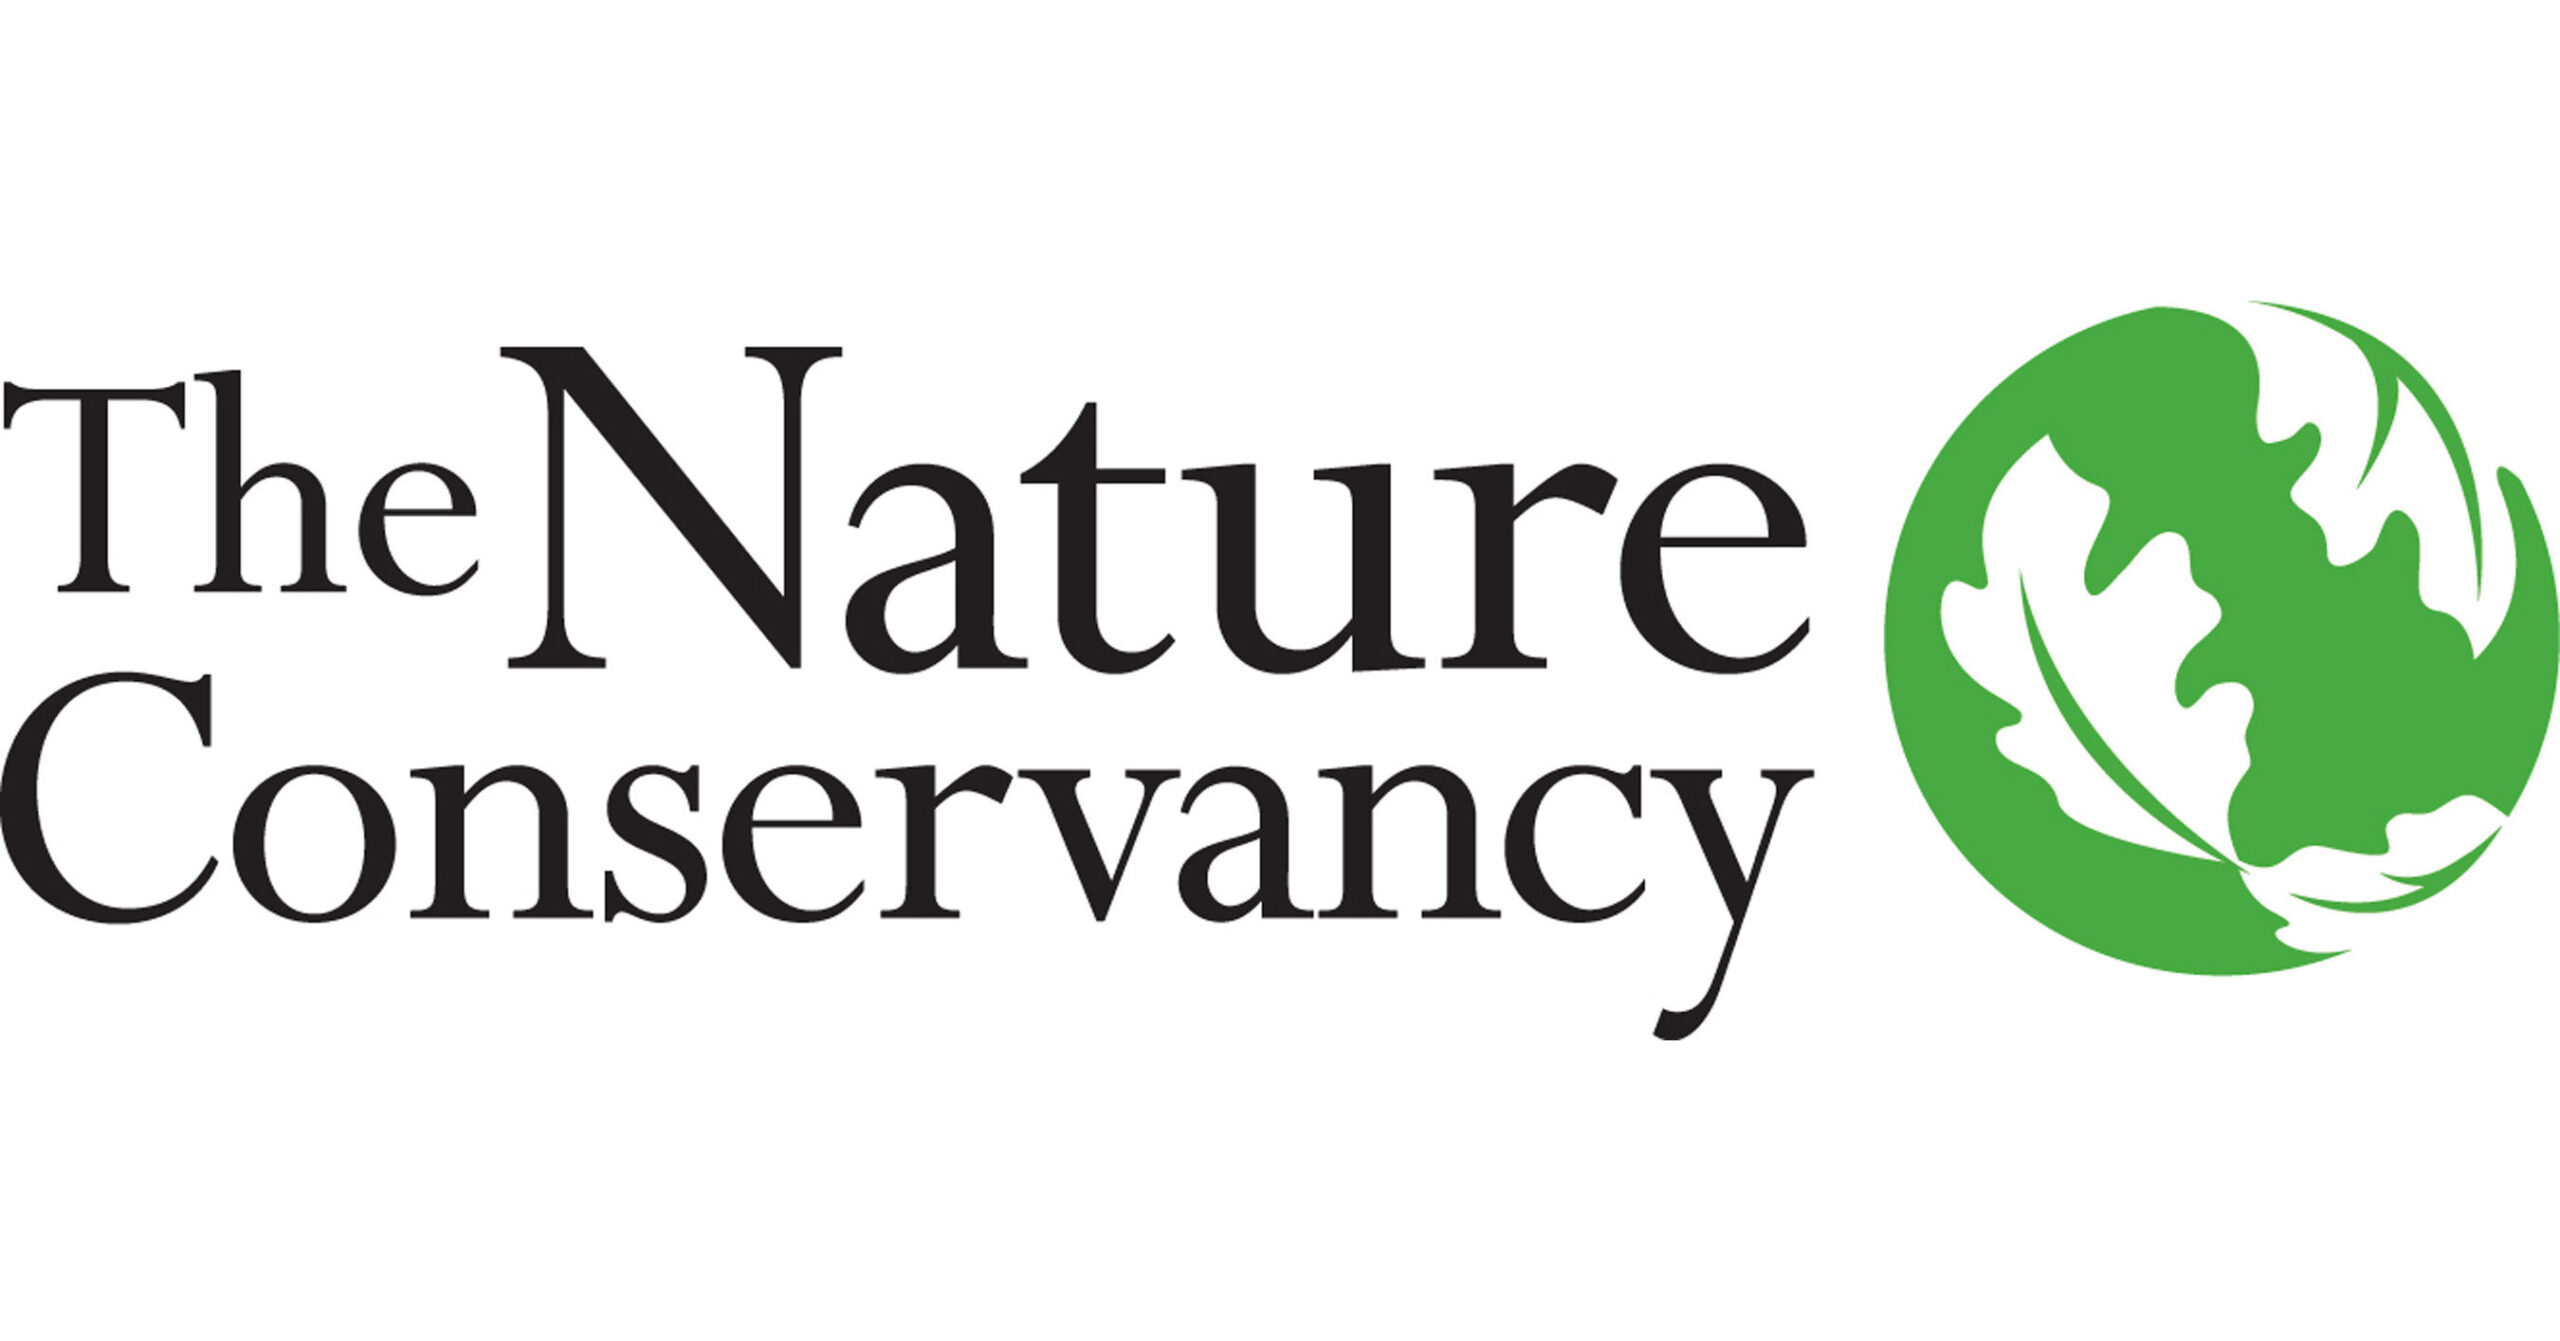 The Nature Conservancy is a leading conservation organization working around the world to conserve the lands and waters on which all life depends. The Conservancy and its more than 1 million members have protected nearly 120 million acres worldwide. Visit The Nature Conservancy on the Web at www.nature.org.